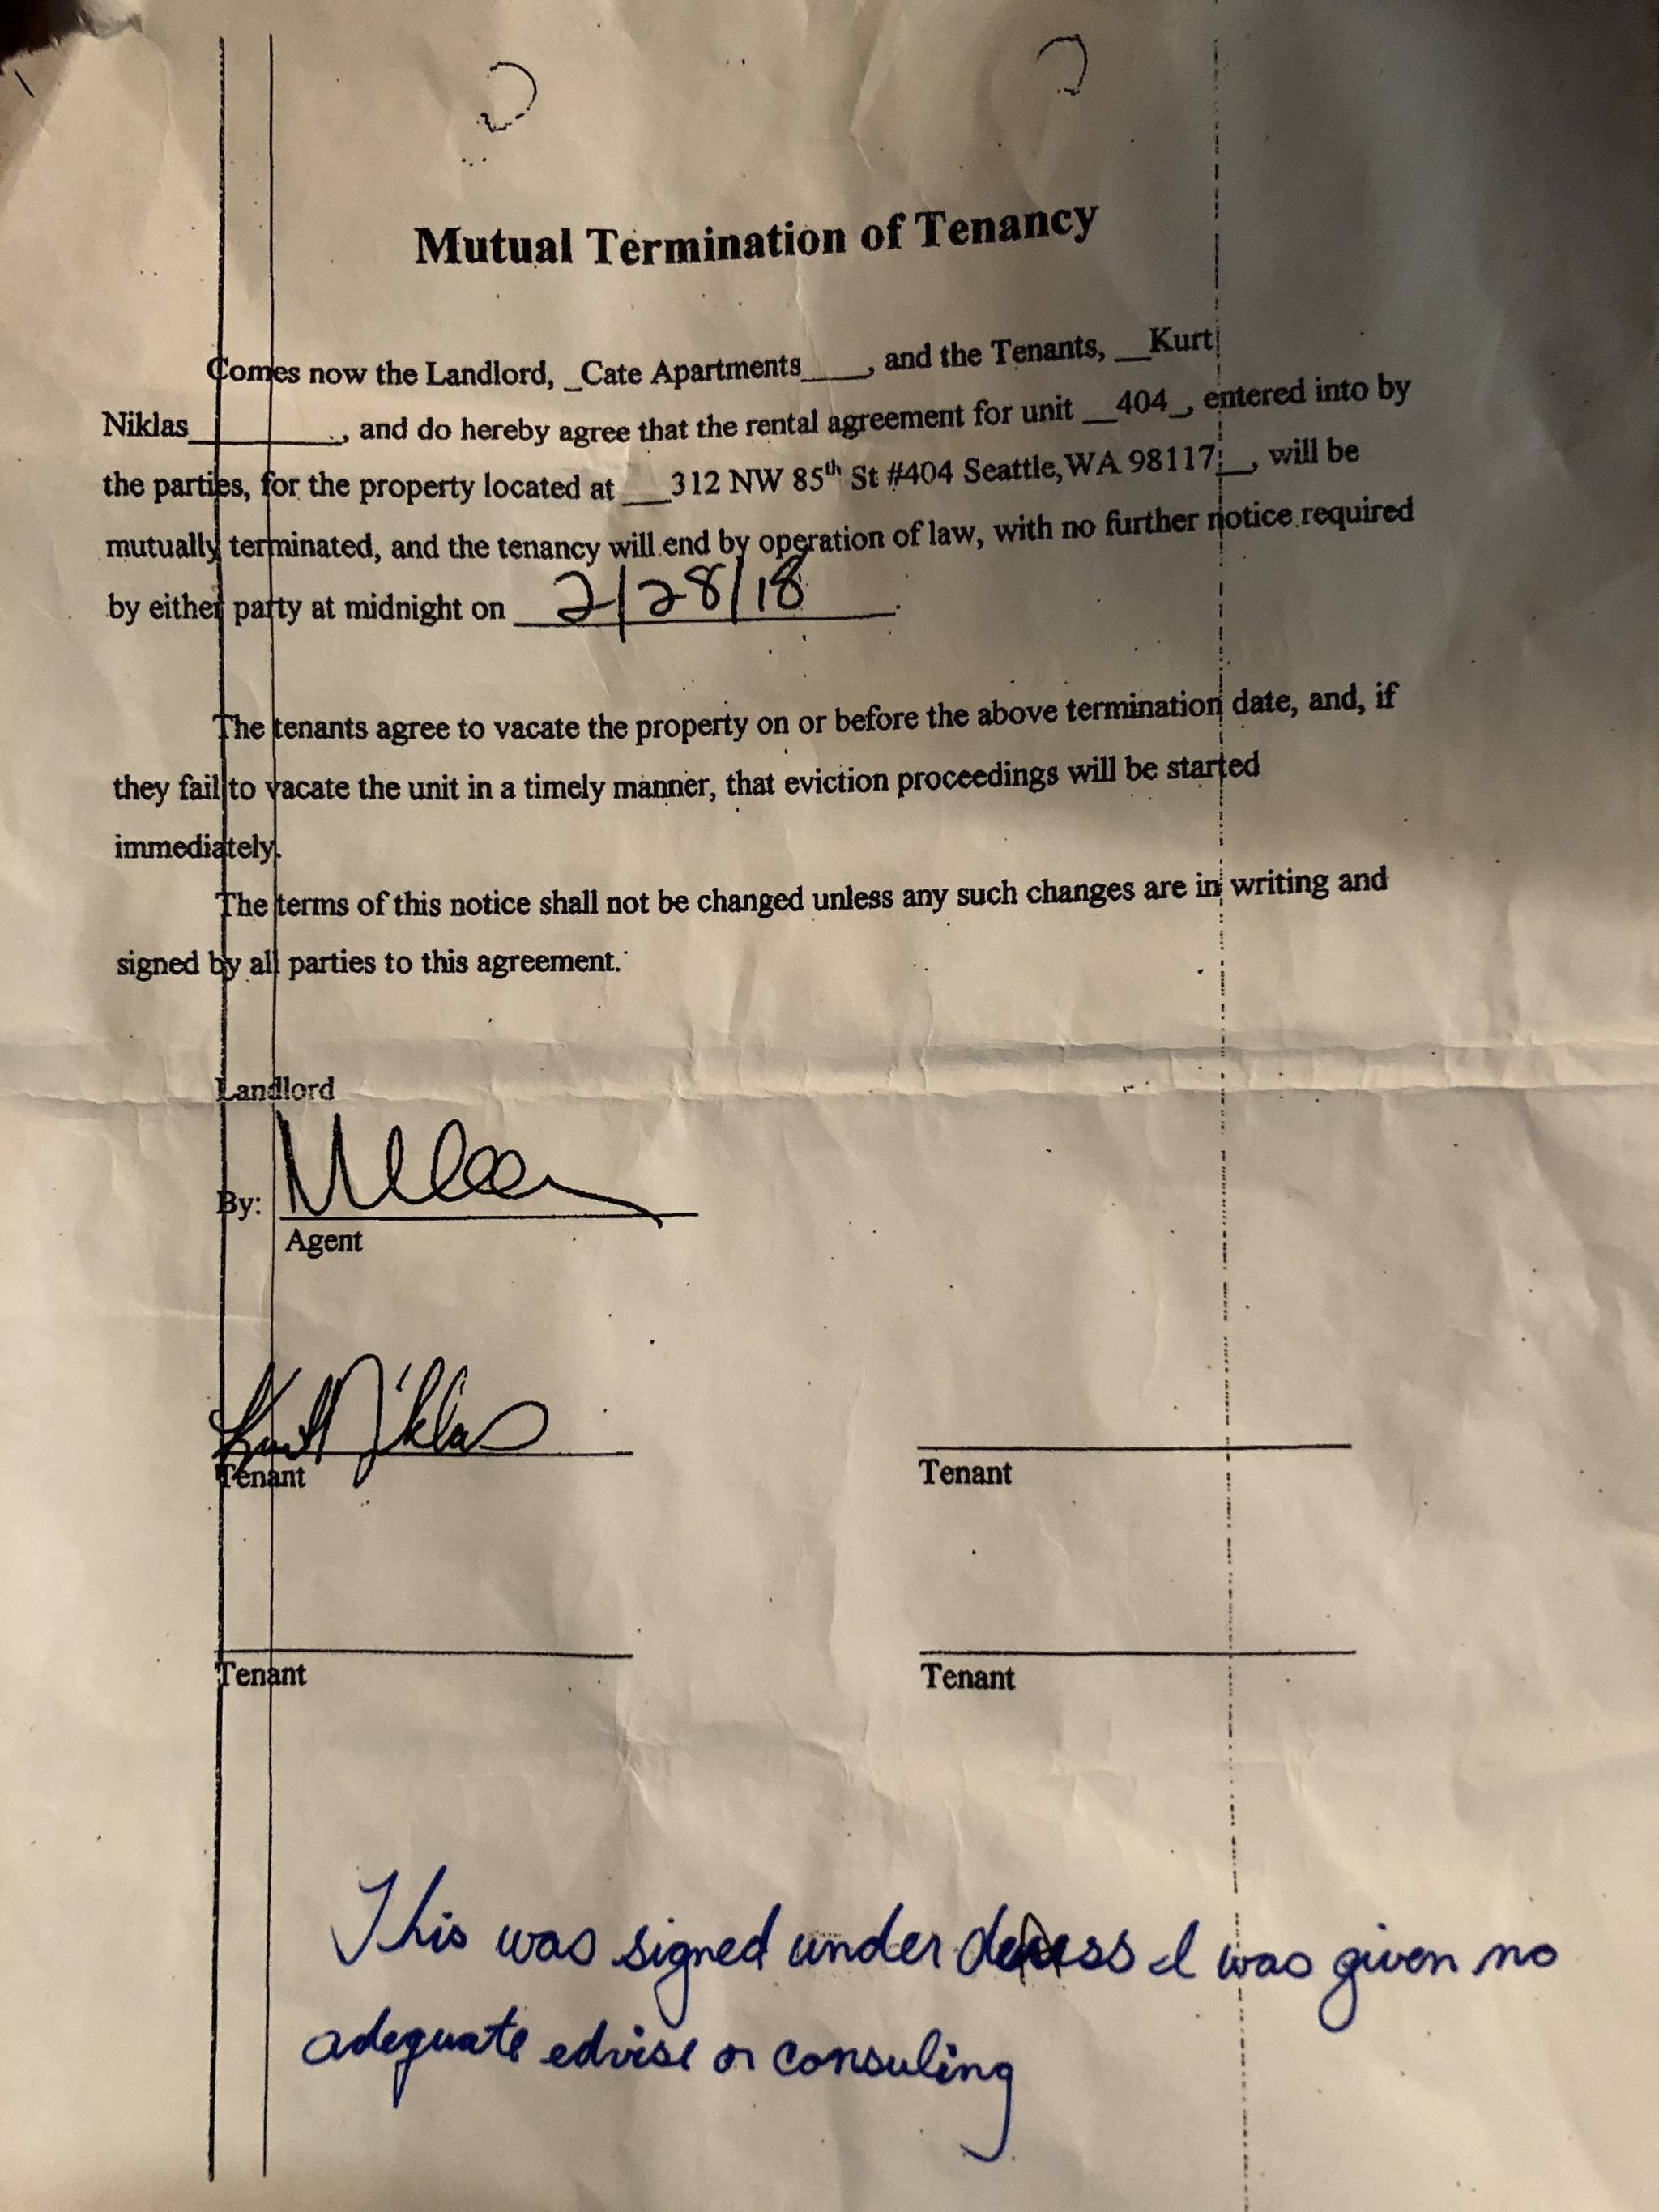 Kurt Niklas says that the original mutual termination agreement he signed listed the move out date as February 2017, but he believes this document was forged, with the “‘17” changed to an “‘18.” Copy courtesy of Kurt Niklas